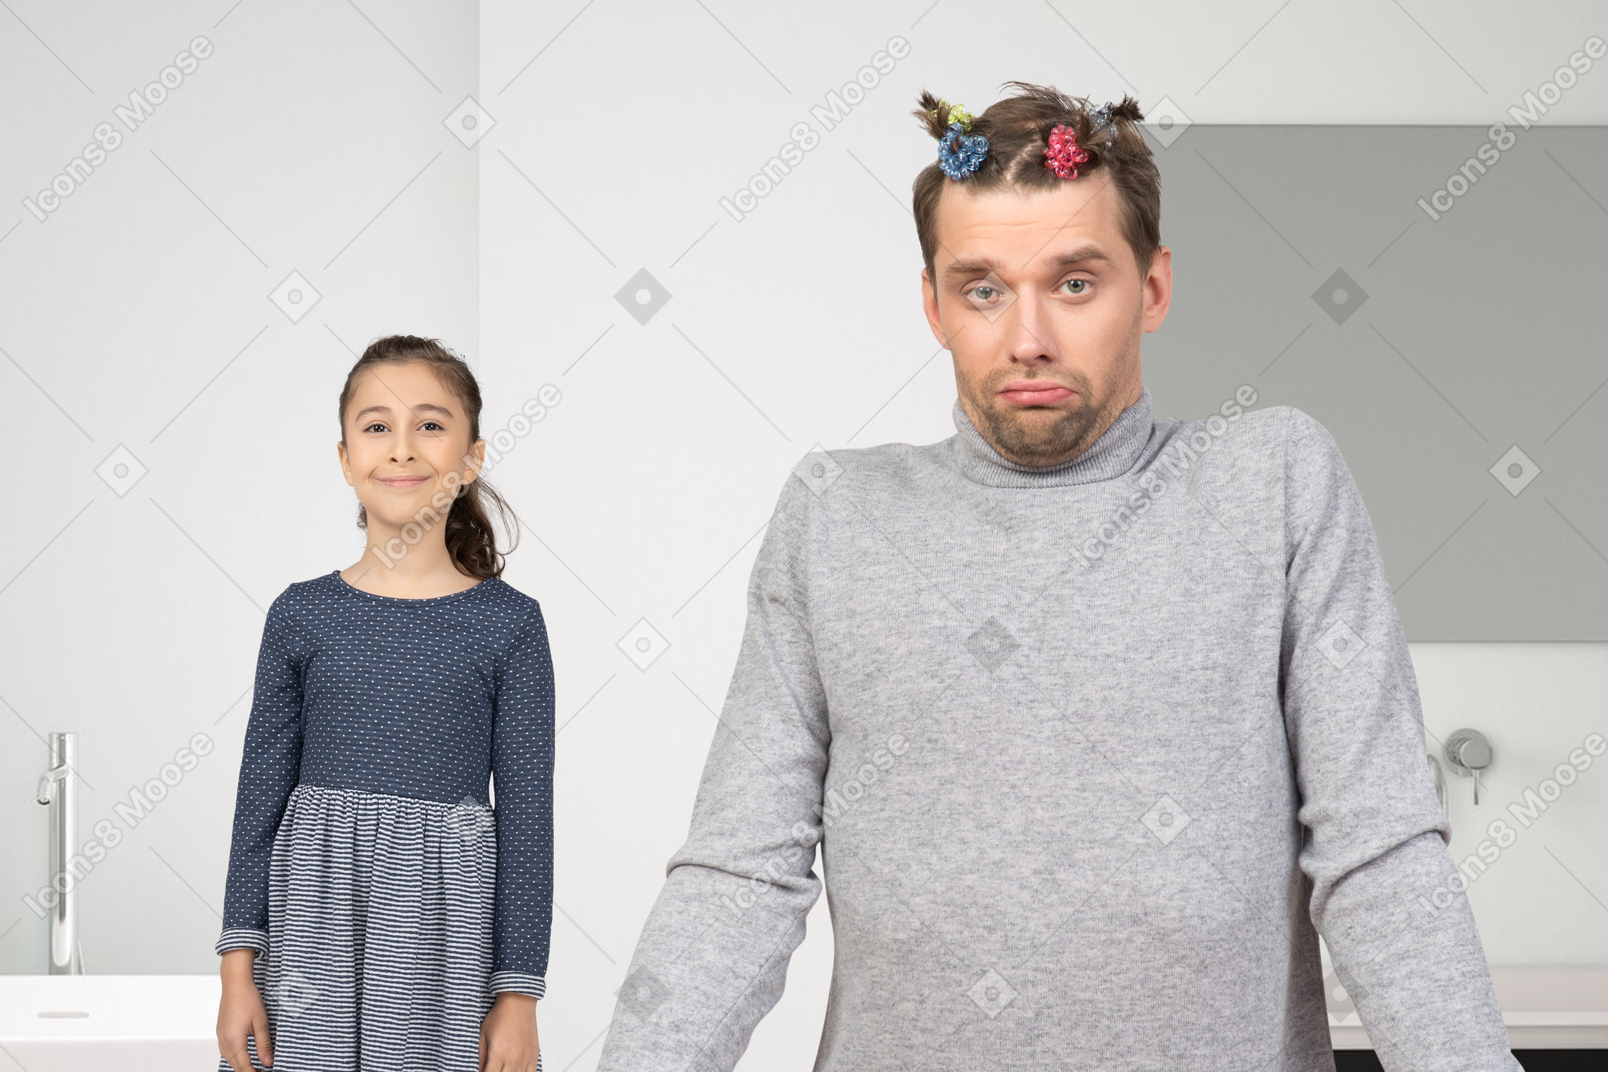 A man with scrunchies in hair standng next to a little girl